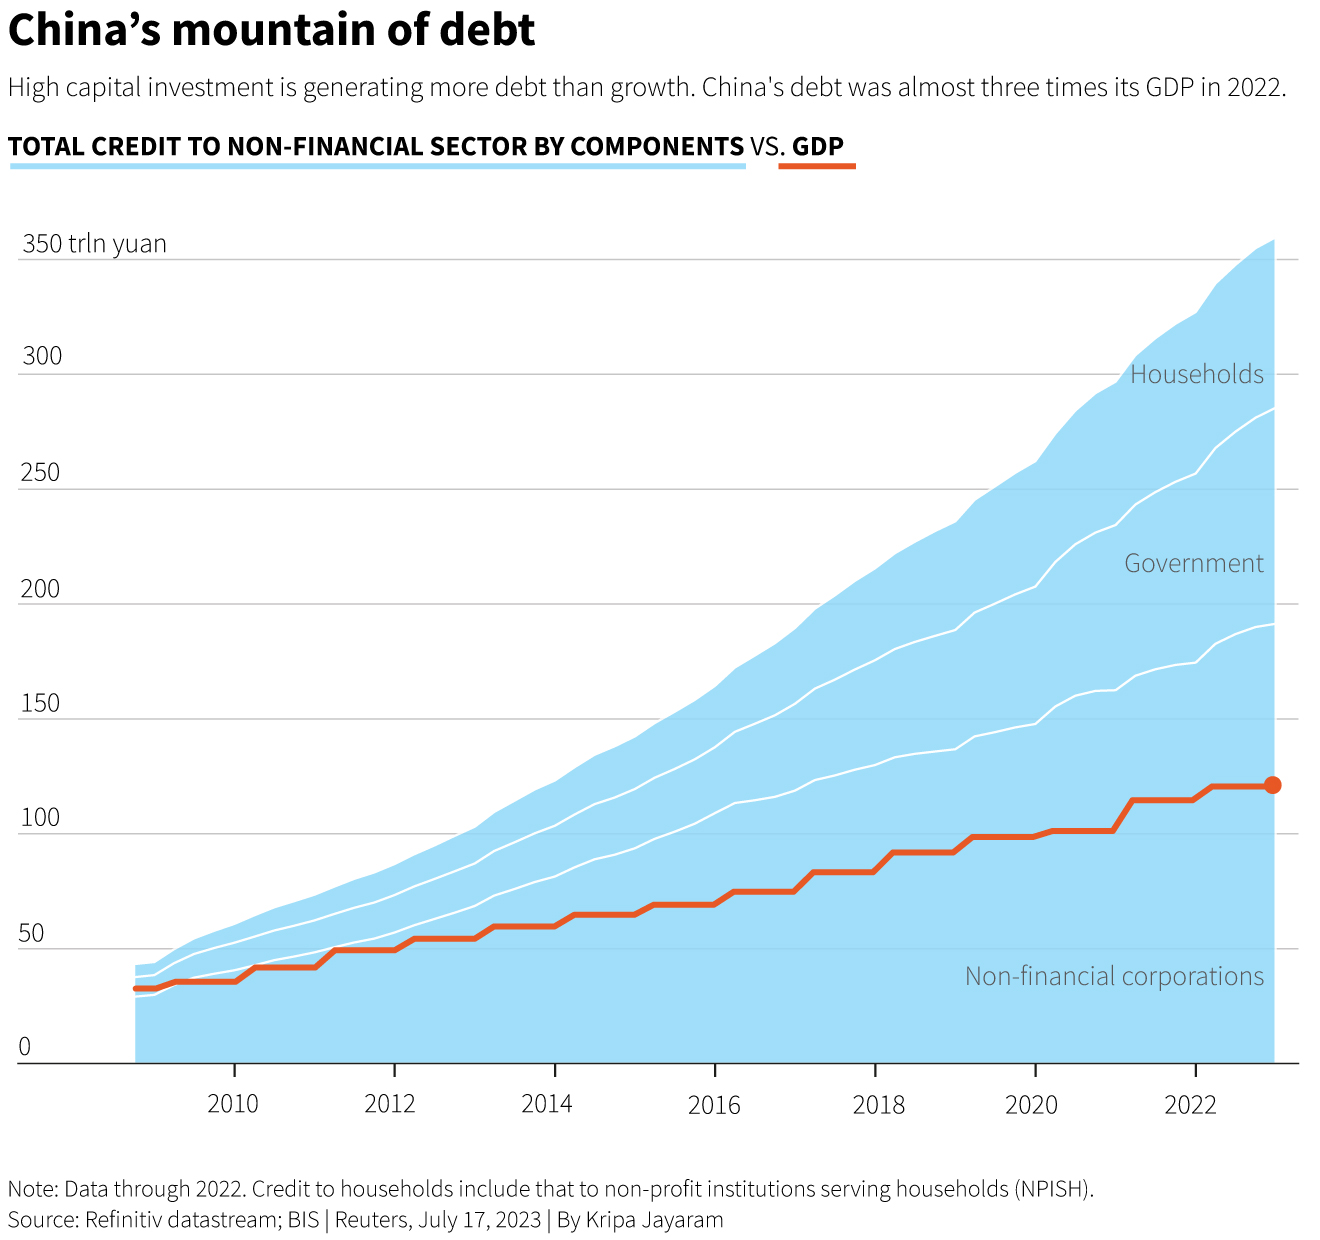 China's debt was 3 times the GDP in 2022